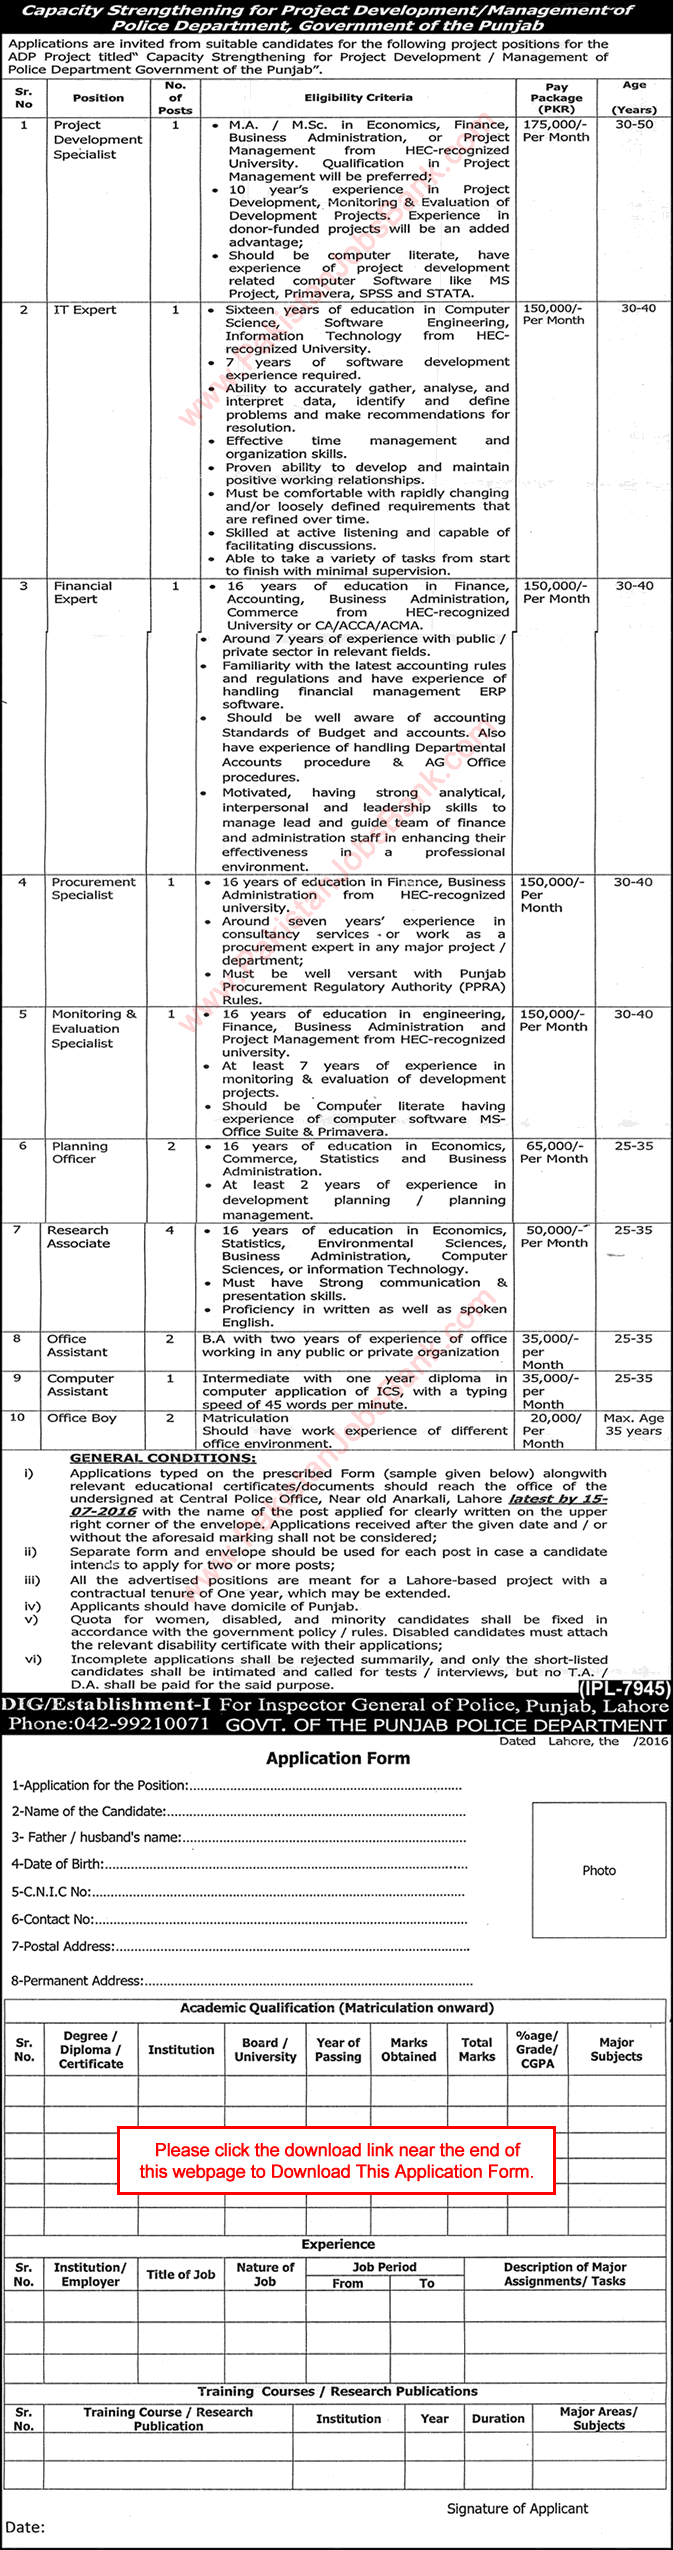 Punjab Police Department Jobs June 2016 July Application Form Research Associates, Planning Officers & Others Latest